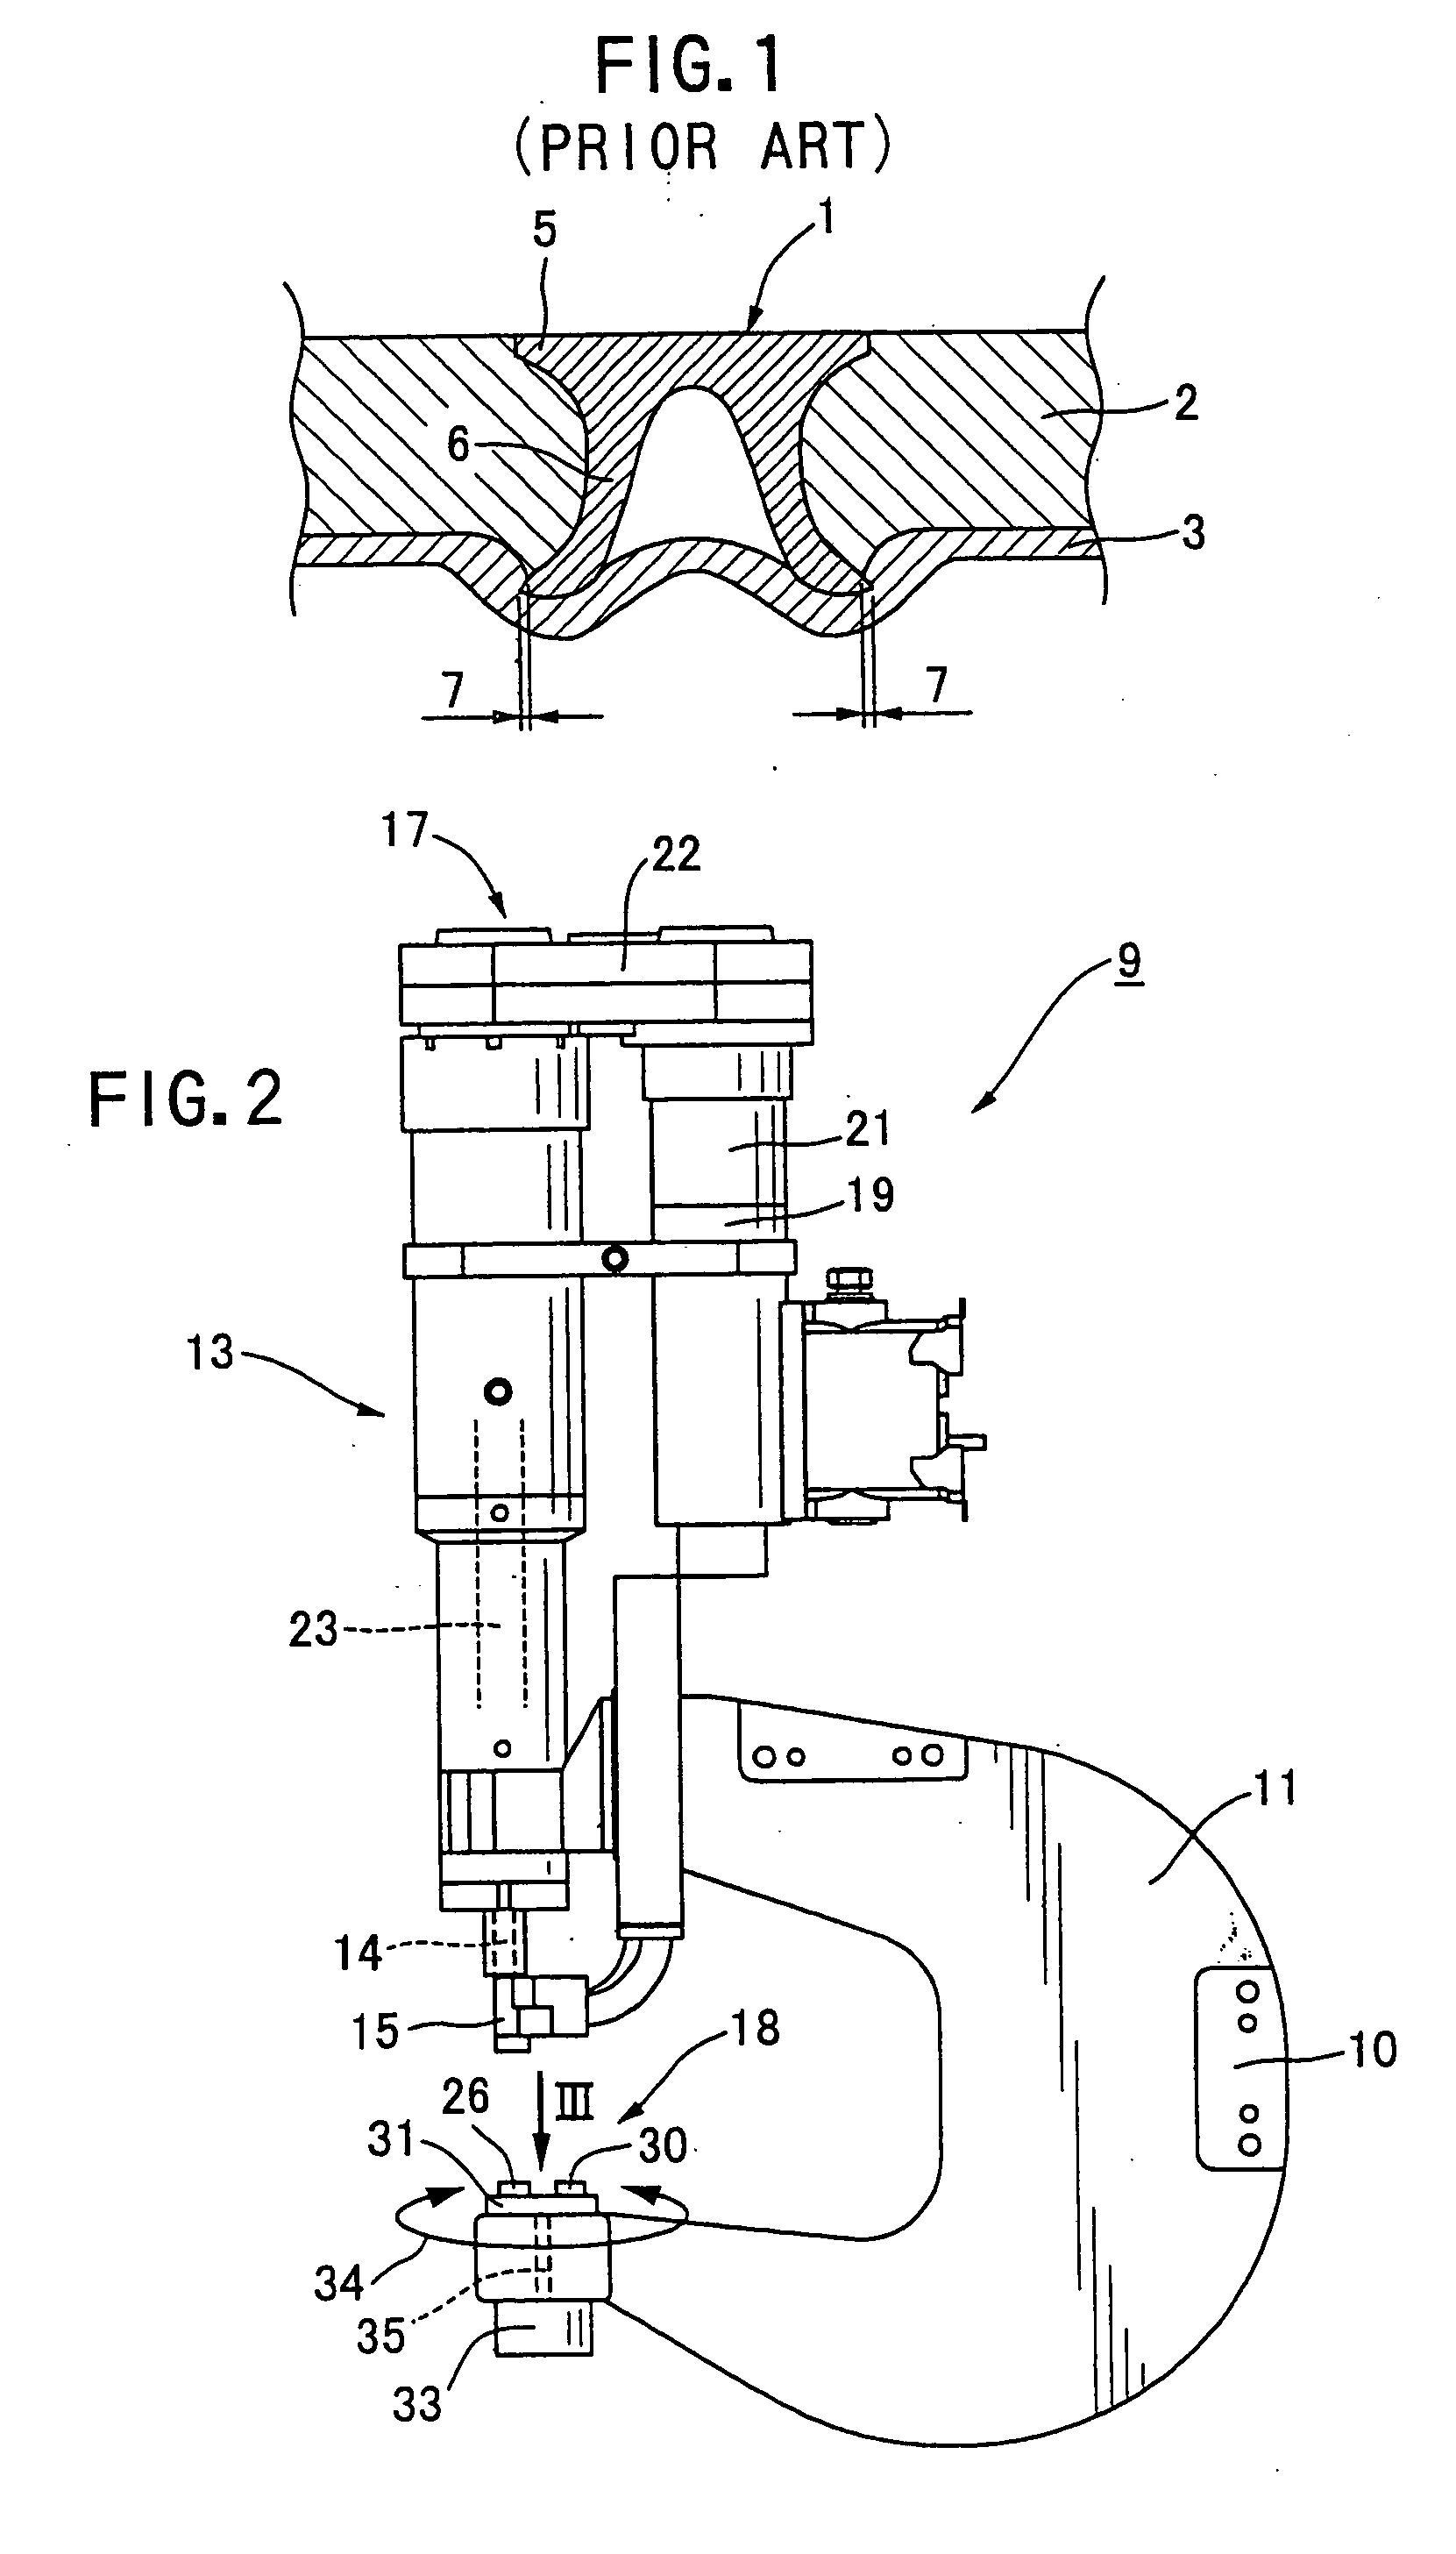 Self-piercing rivet setting apparatus and system